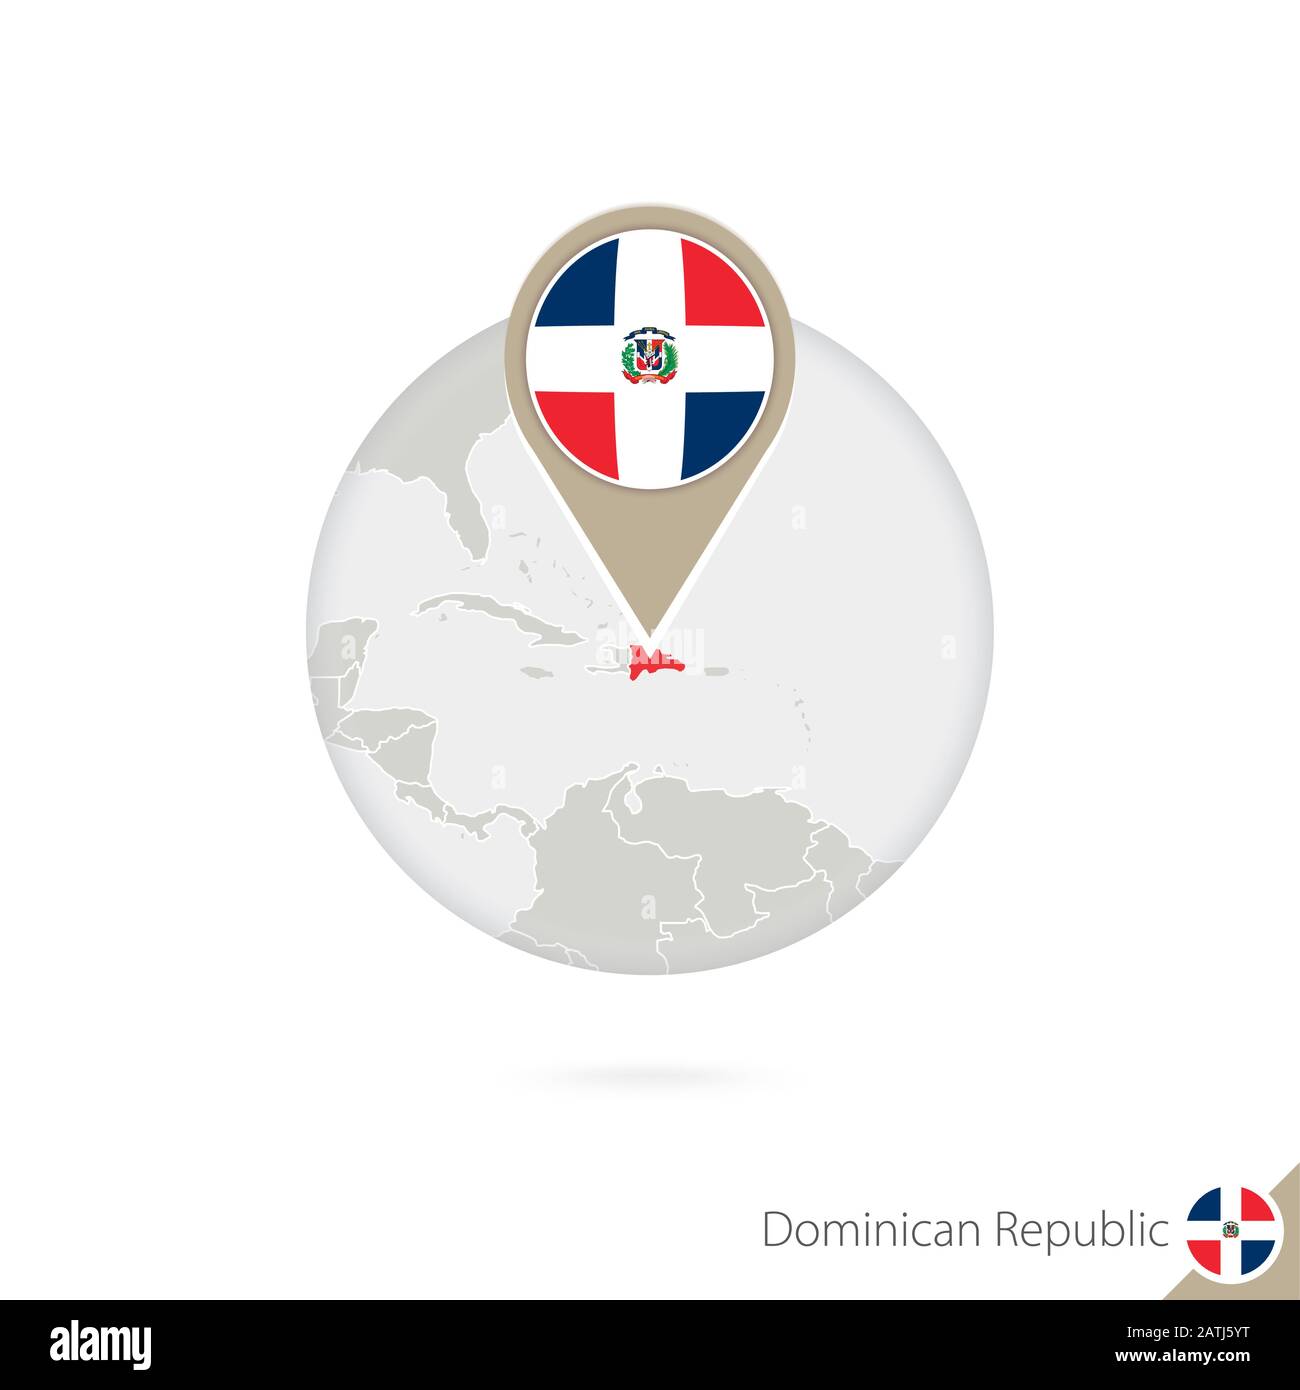 Dominican Republic map and flag in circle. Map of Dominican Republic, Dominican Republic flag pin. Map of Dominican Republic in the style of the globe Stock Vector